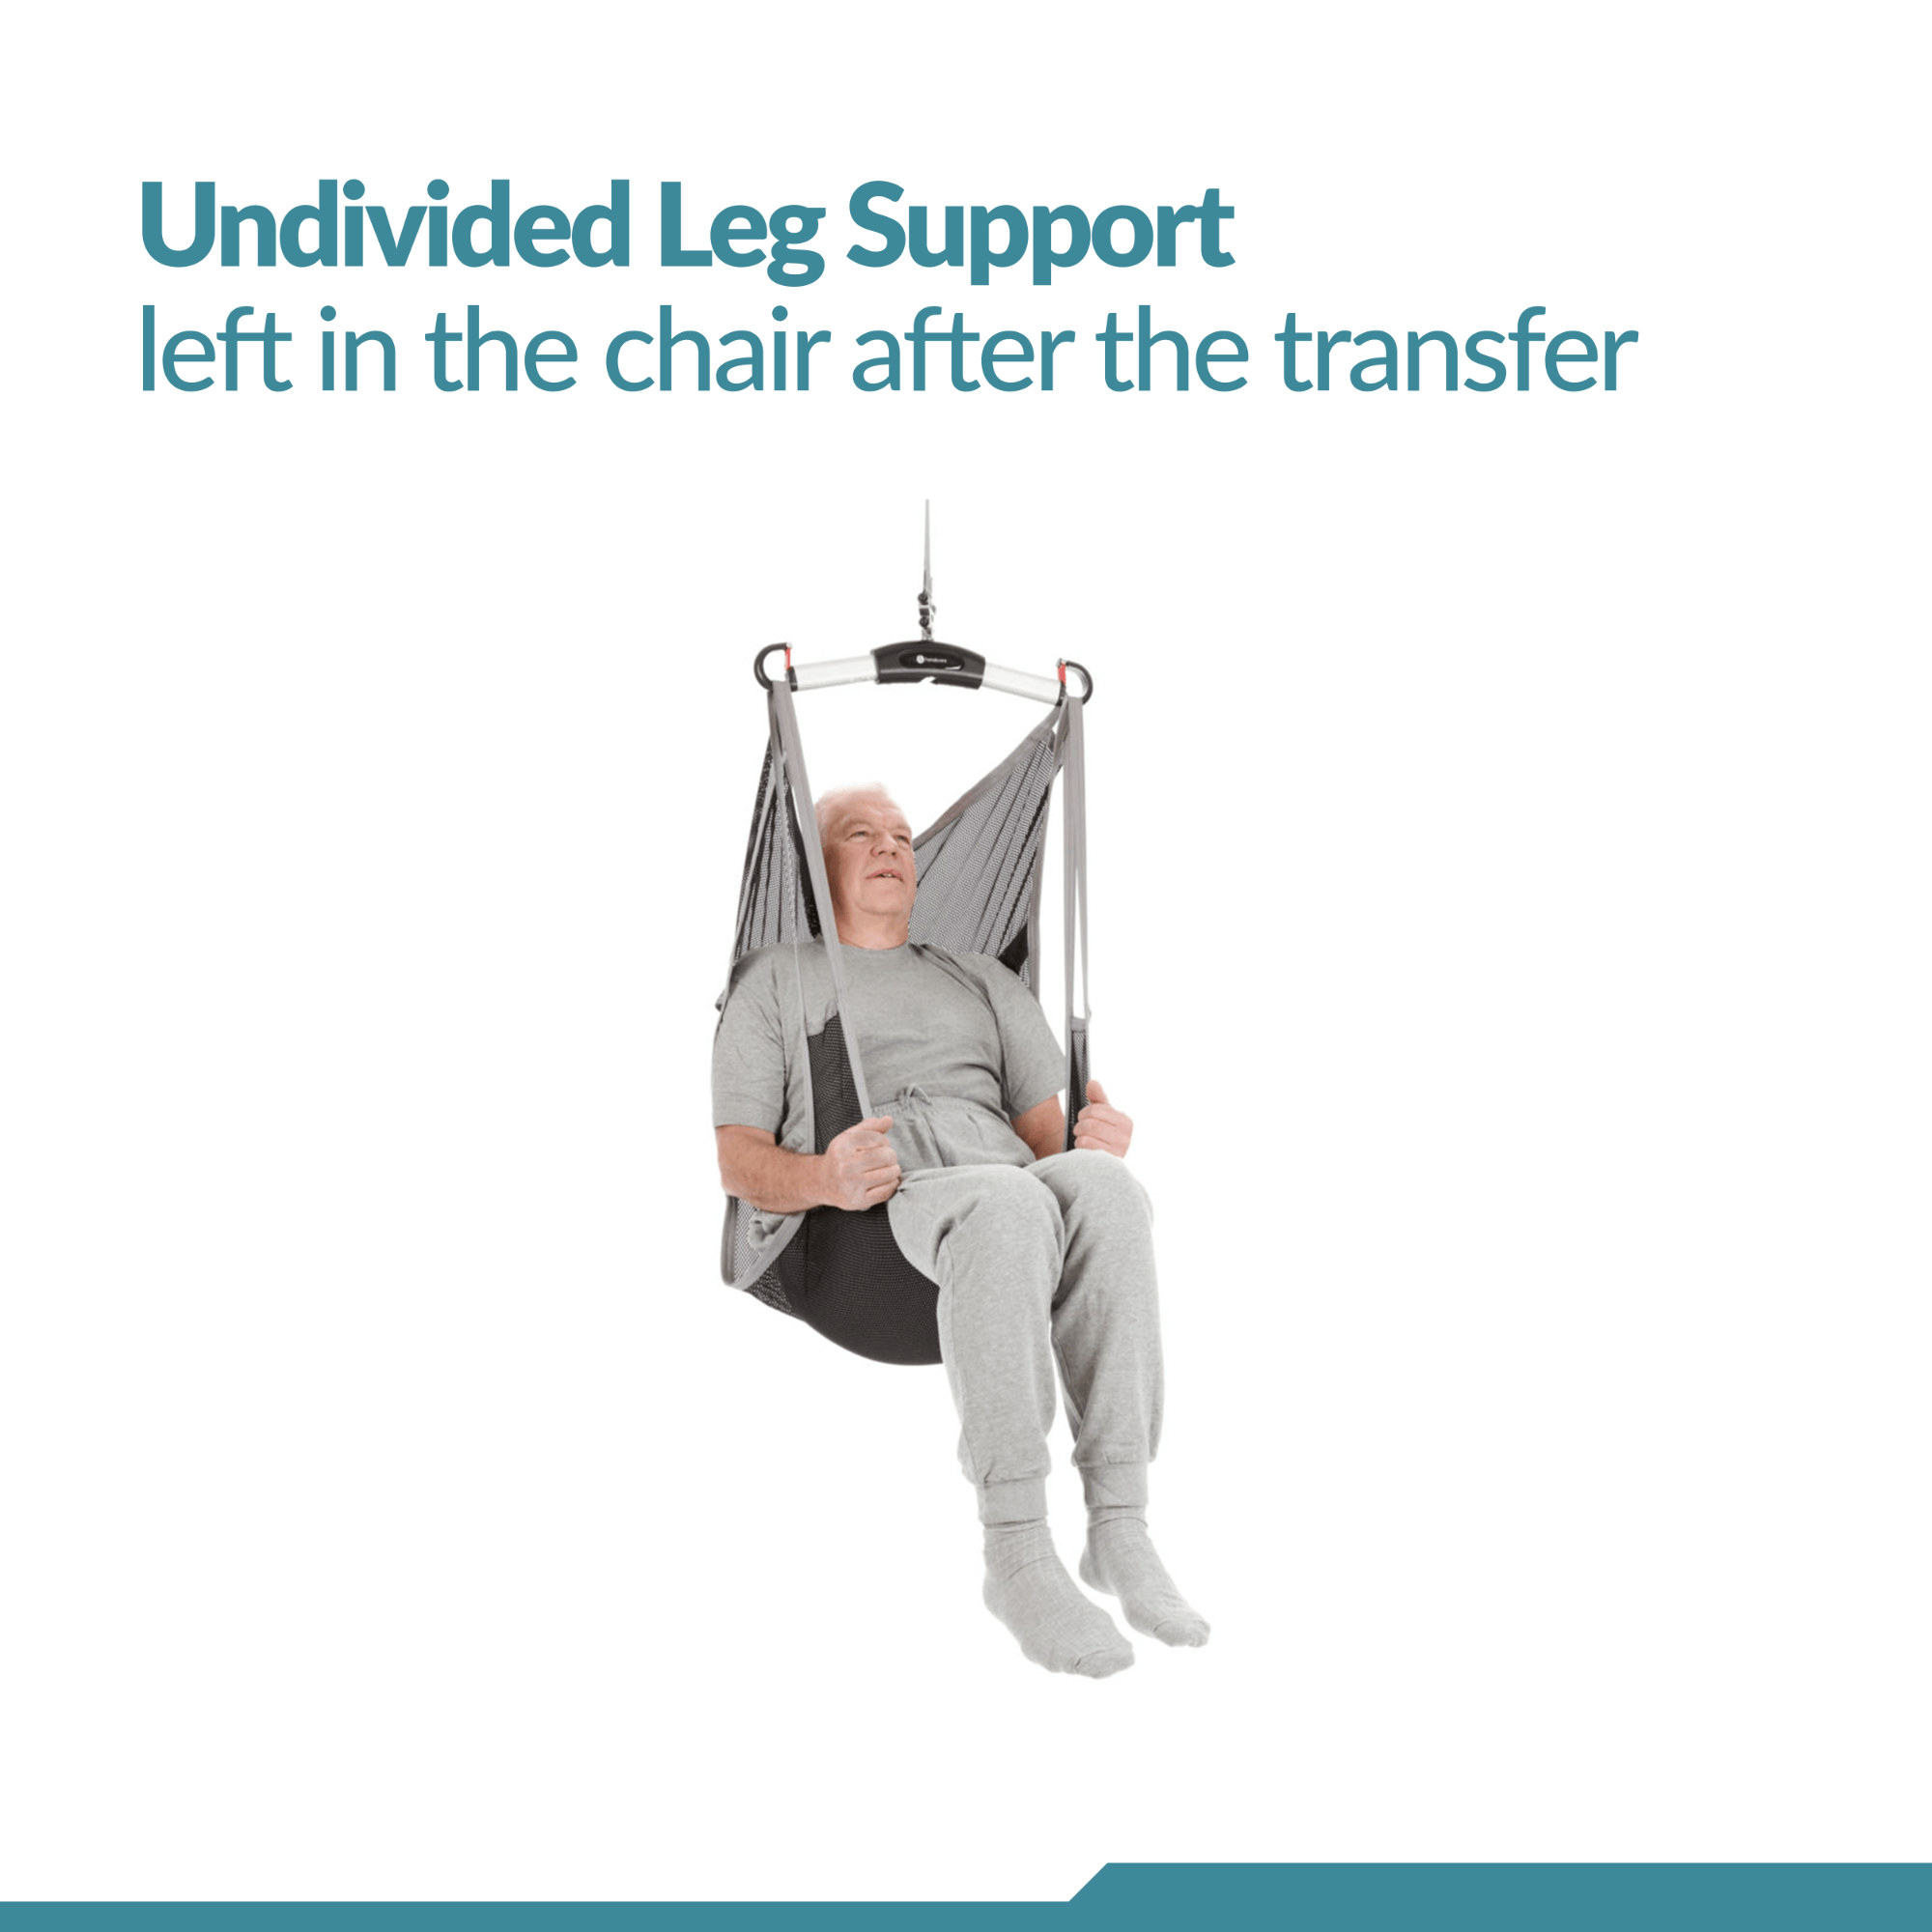 Standard Sling - Extra Head Support - Universal Patient Lift Sling for Lifts for Home Use - Transfer Safely with Patient Lifter - Compatible with Hoyer Lift - Easy-to-Use